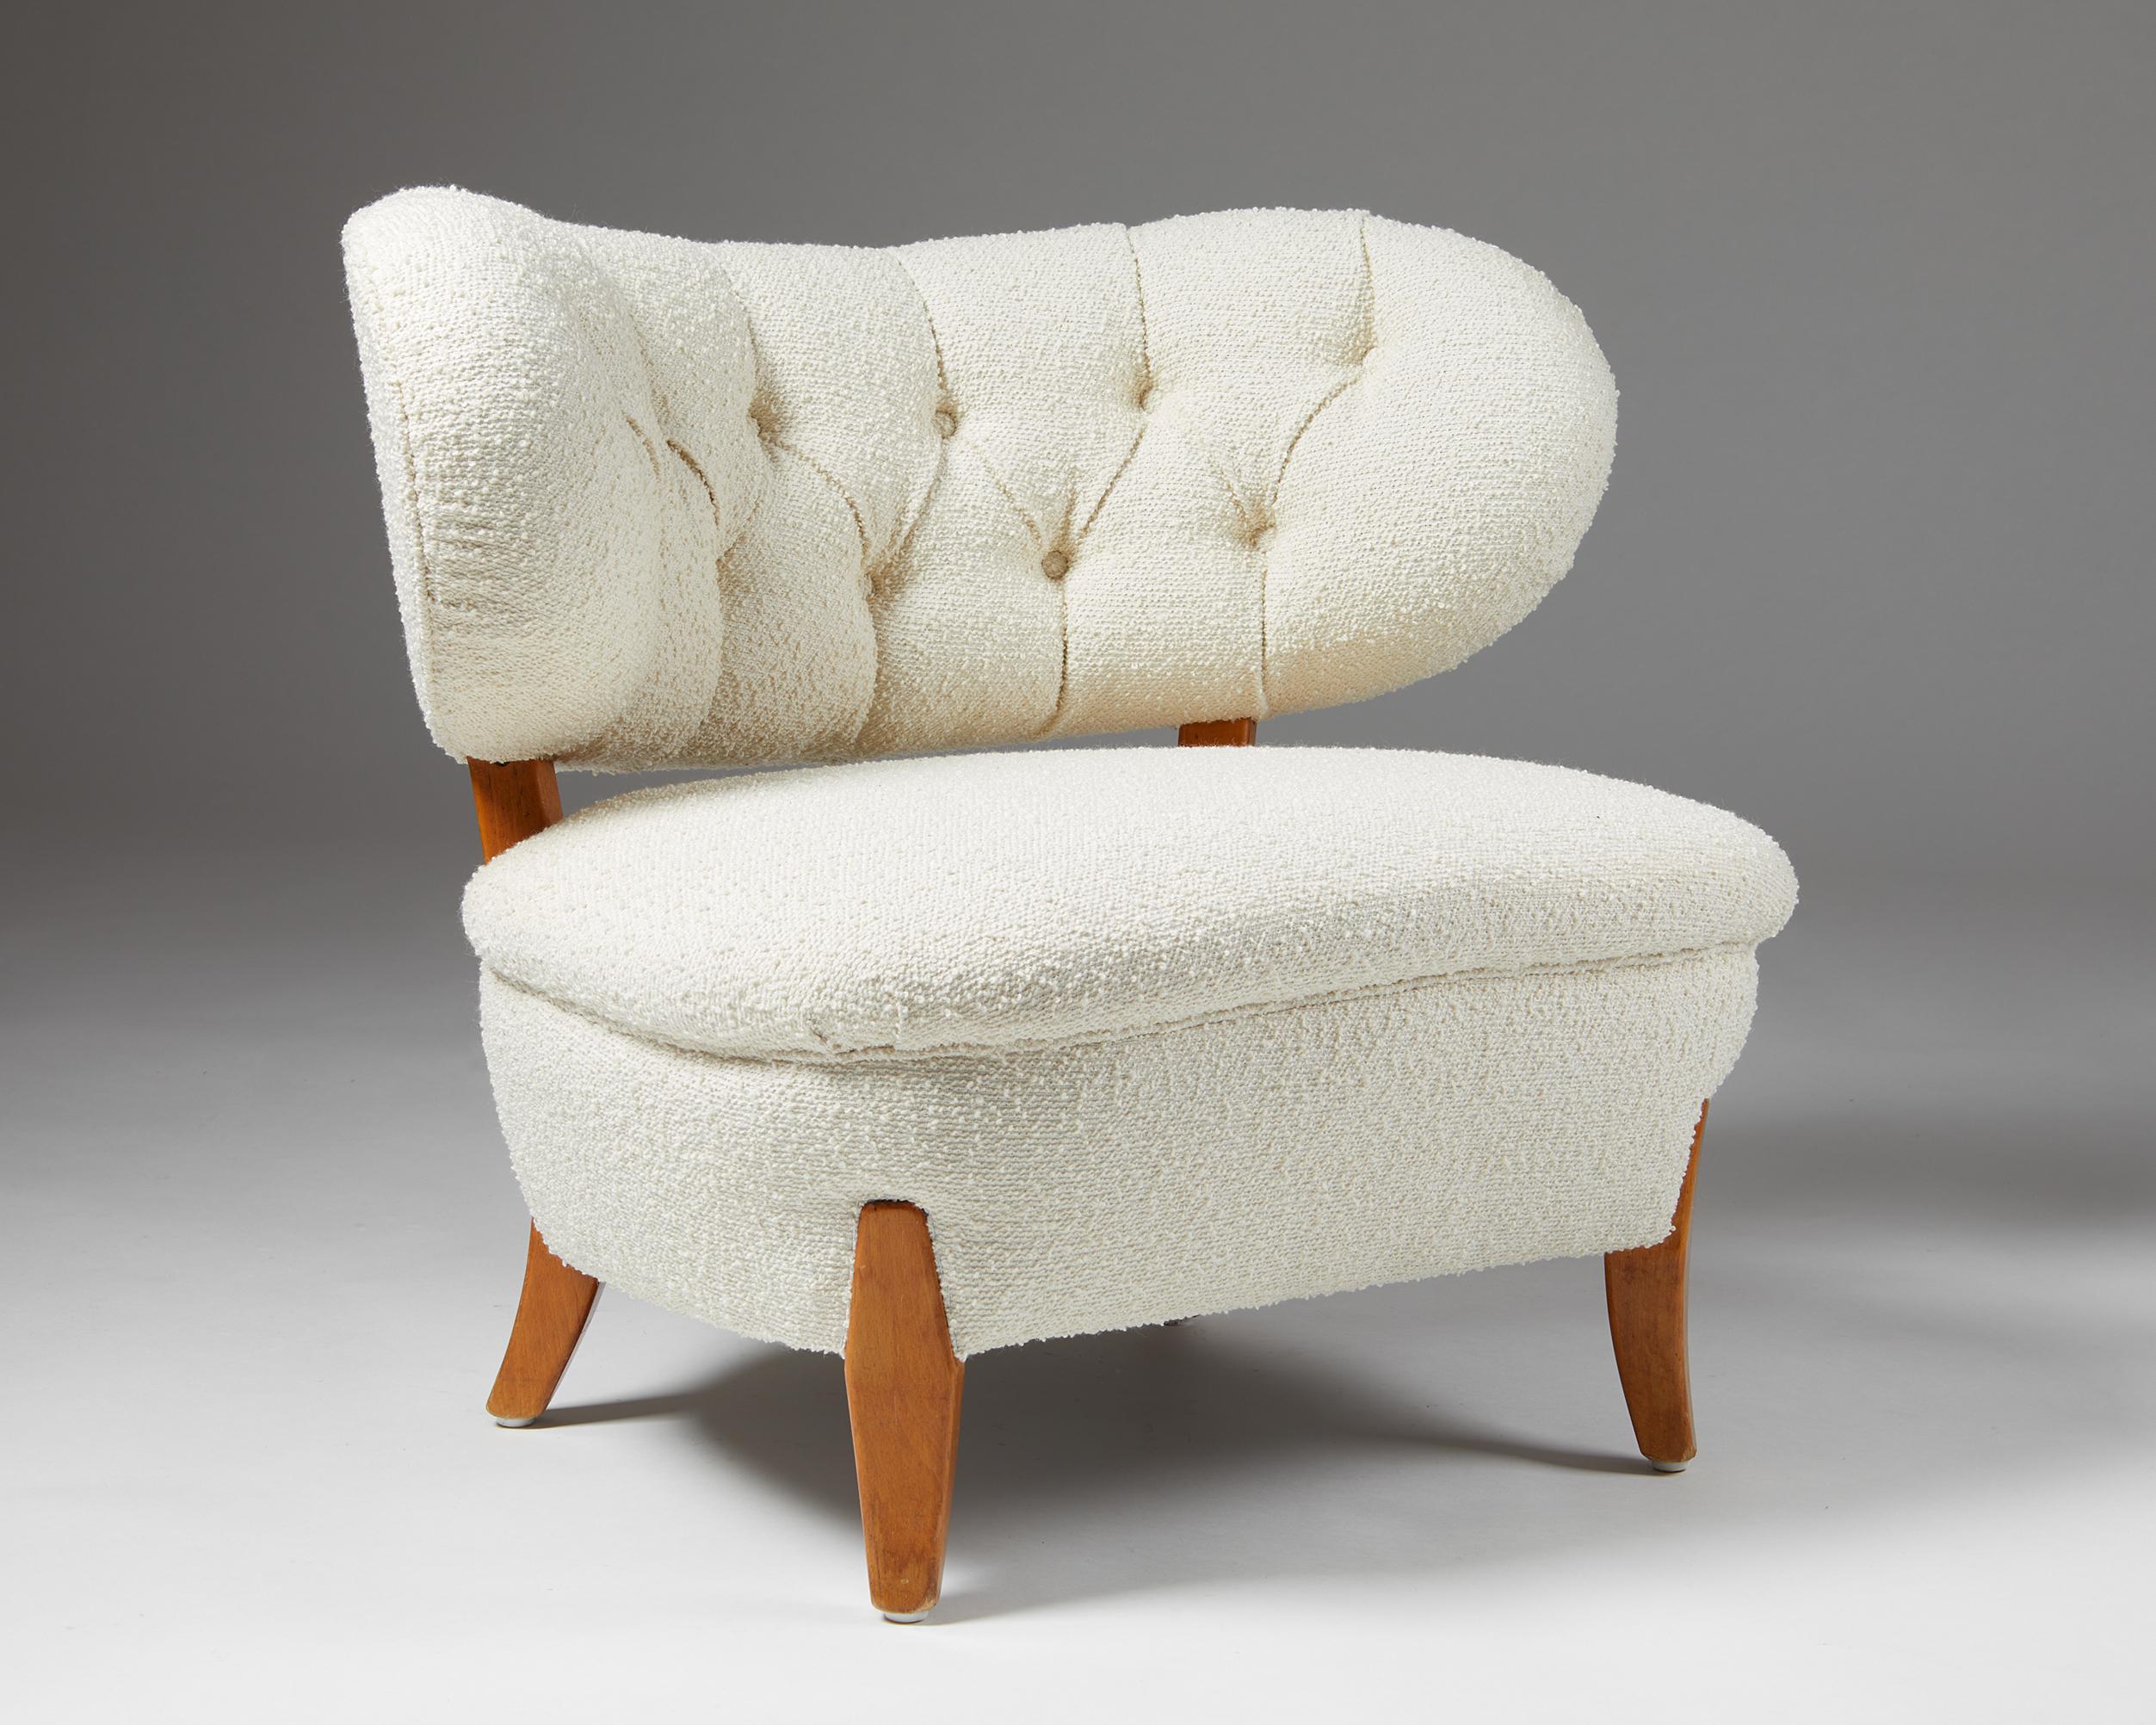 Easy chair designed by Otto Shulz for Boet,
Sweden. 1940s.

Wool upholstery and lacquered wood.

Measurements:
H: 70 cm / 2' 3 1/2